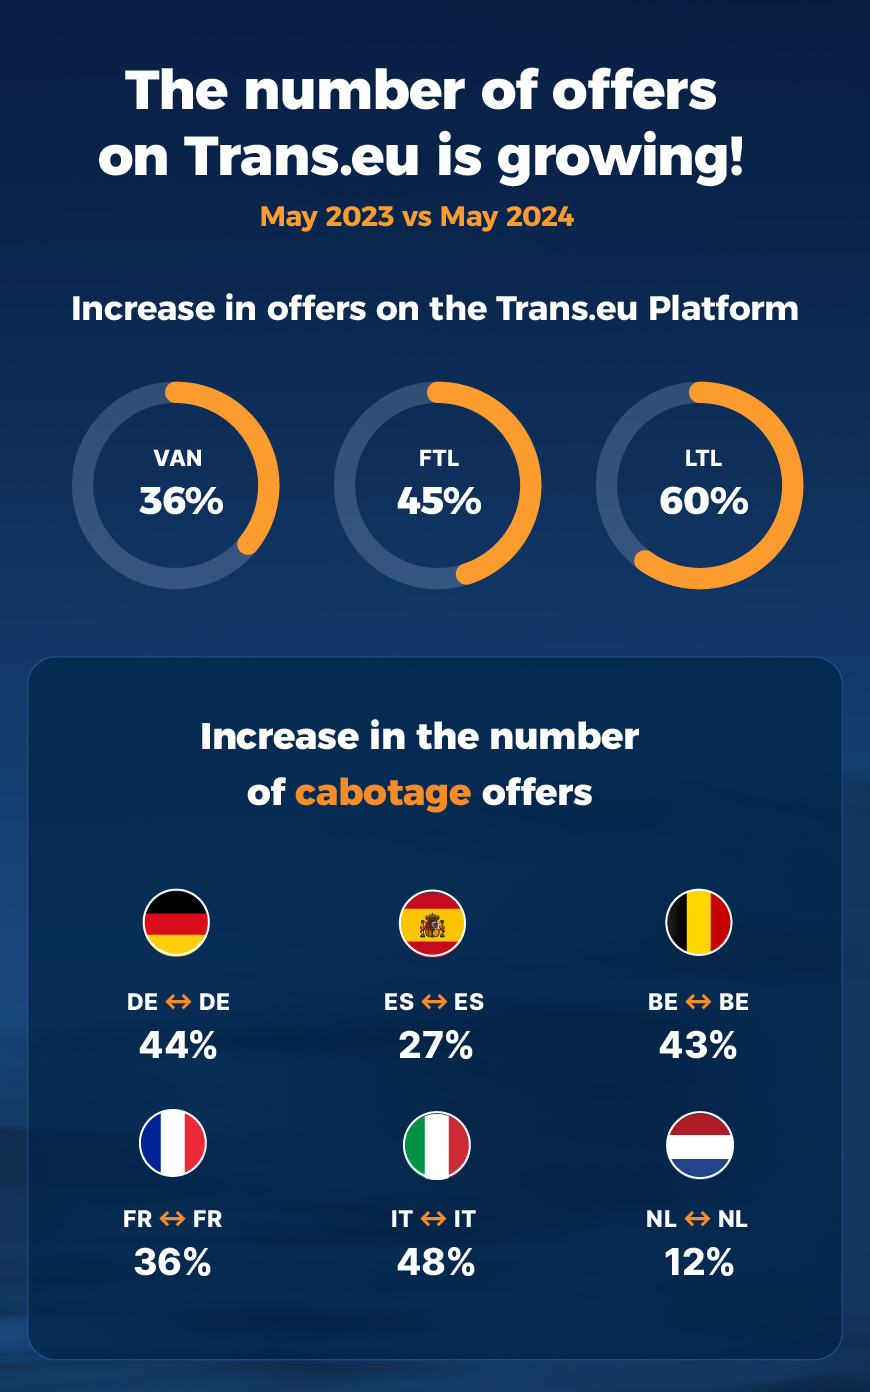 The number of offers on Trans.eu is growing!
May 2023 vs May 2024
Increase in offers on the Trans.eu Platform